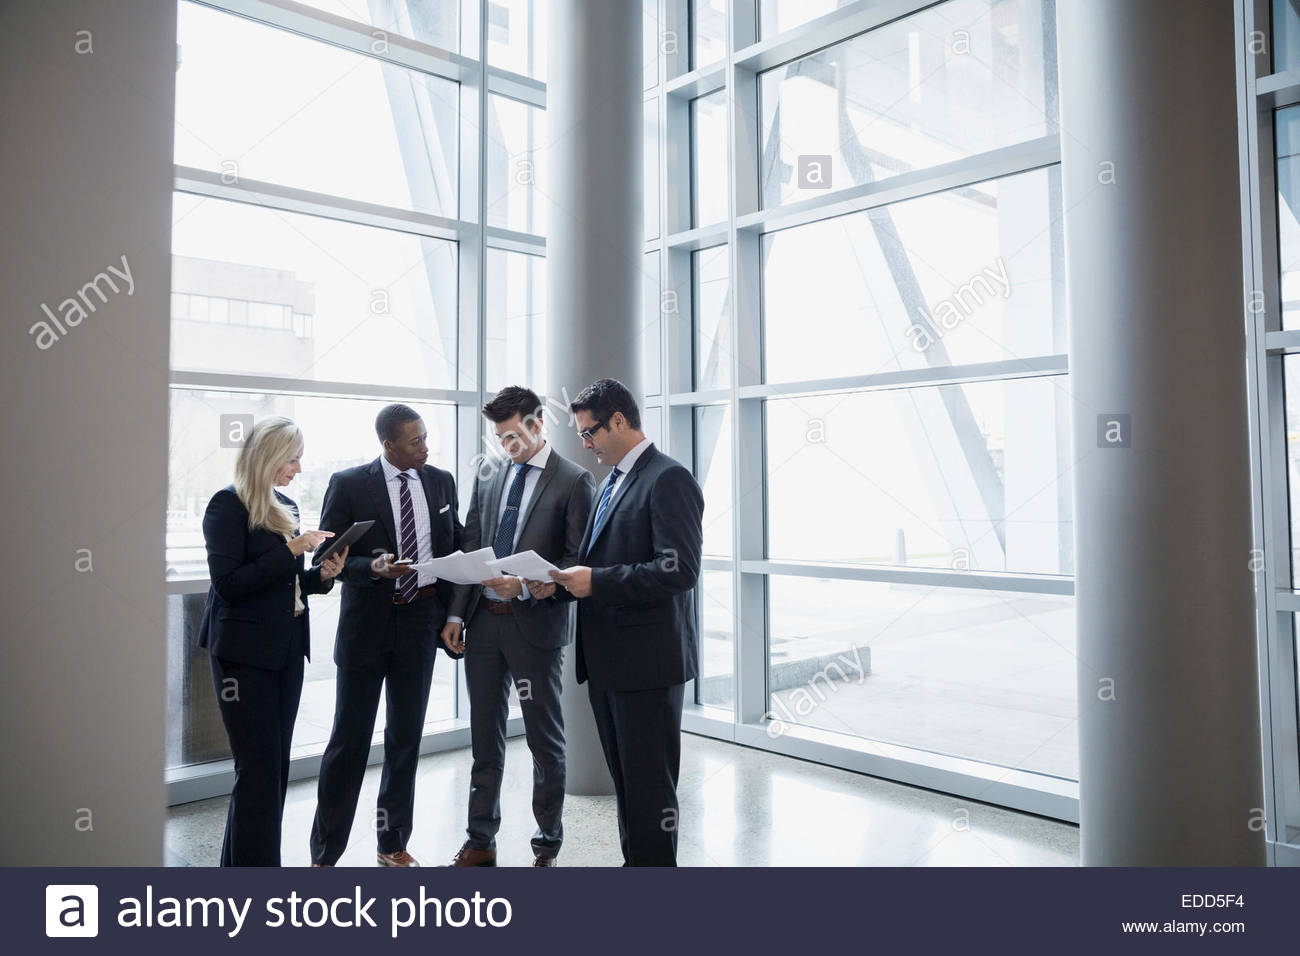 Business people discussing paperwork Stock Photo